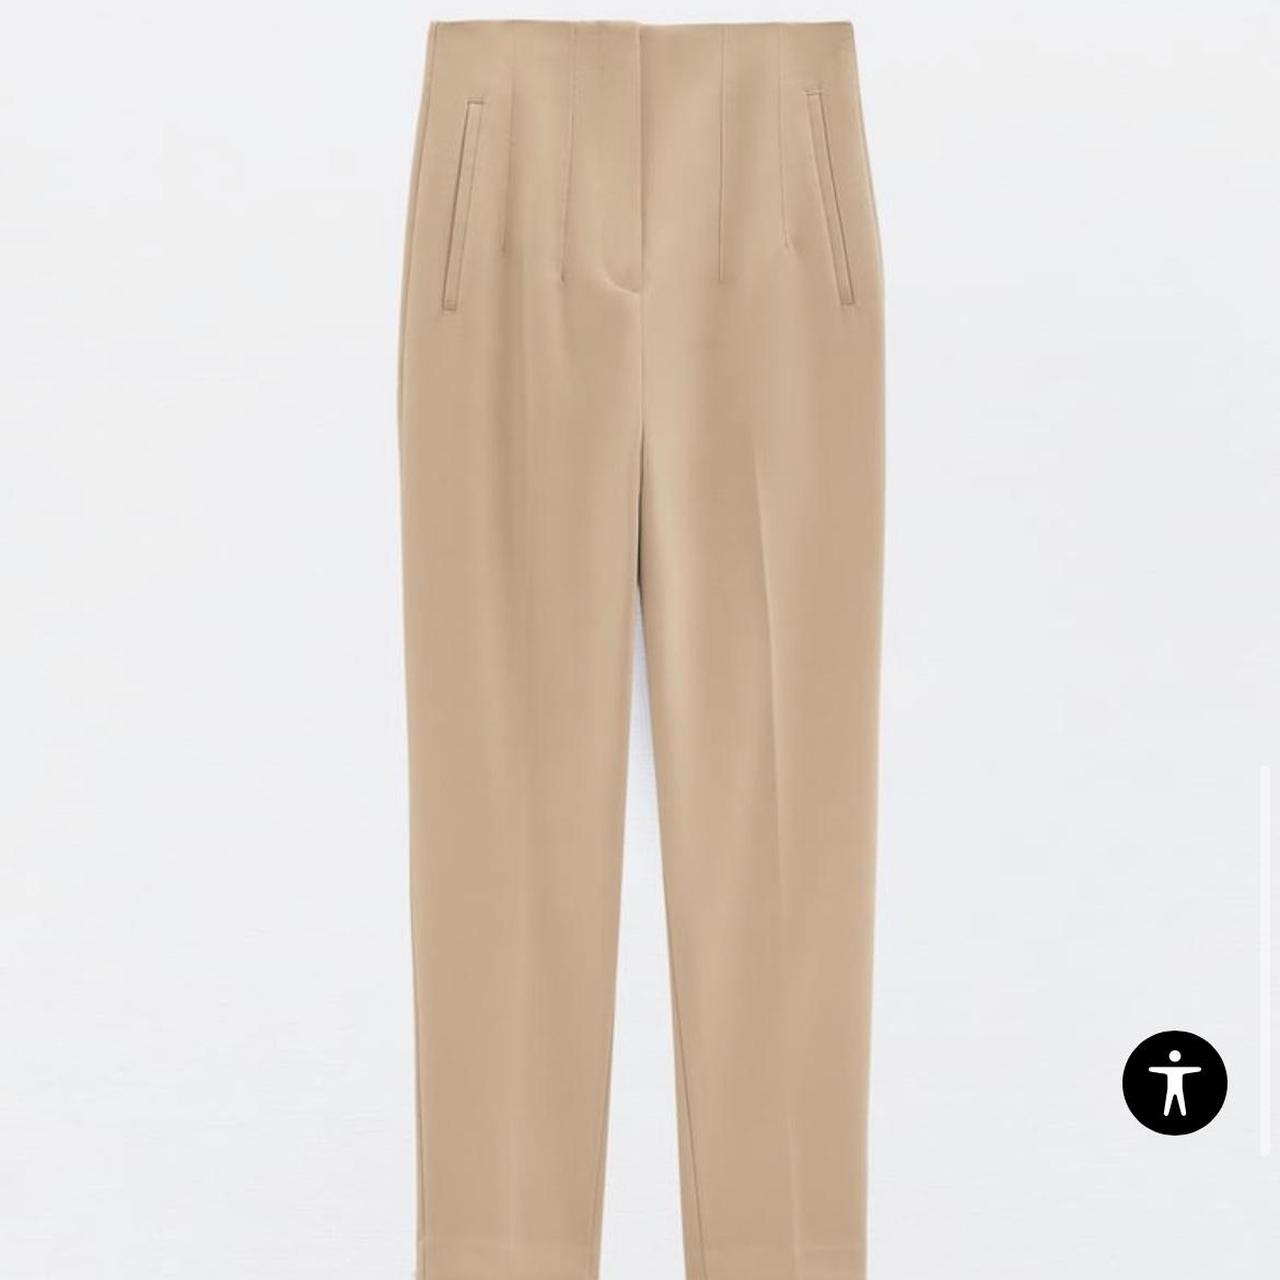 Za Womens High Waisted Beige Beige Trousers Women Elegant Spring Fashion  Office Pants For Casual Wear 211007 From Bai06, $23.4 | DHgate.Com